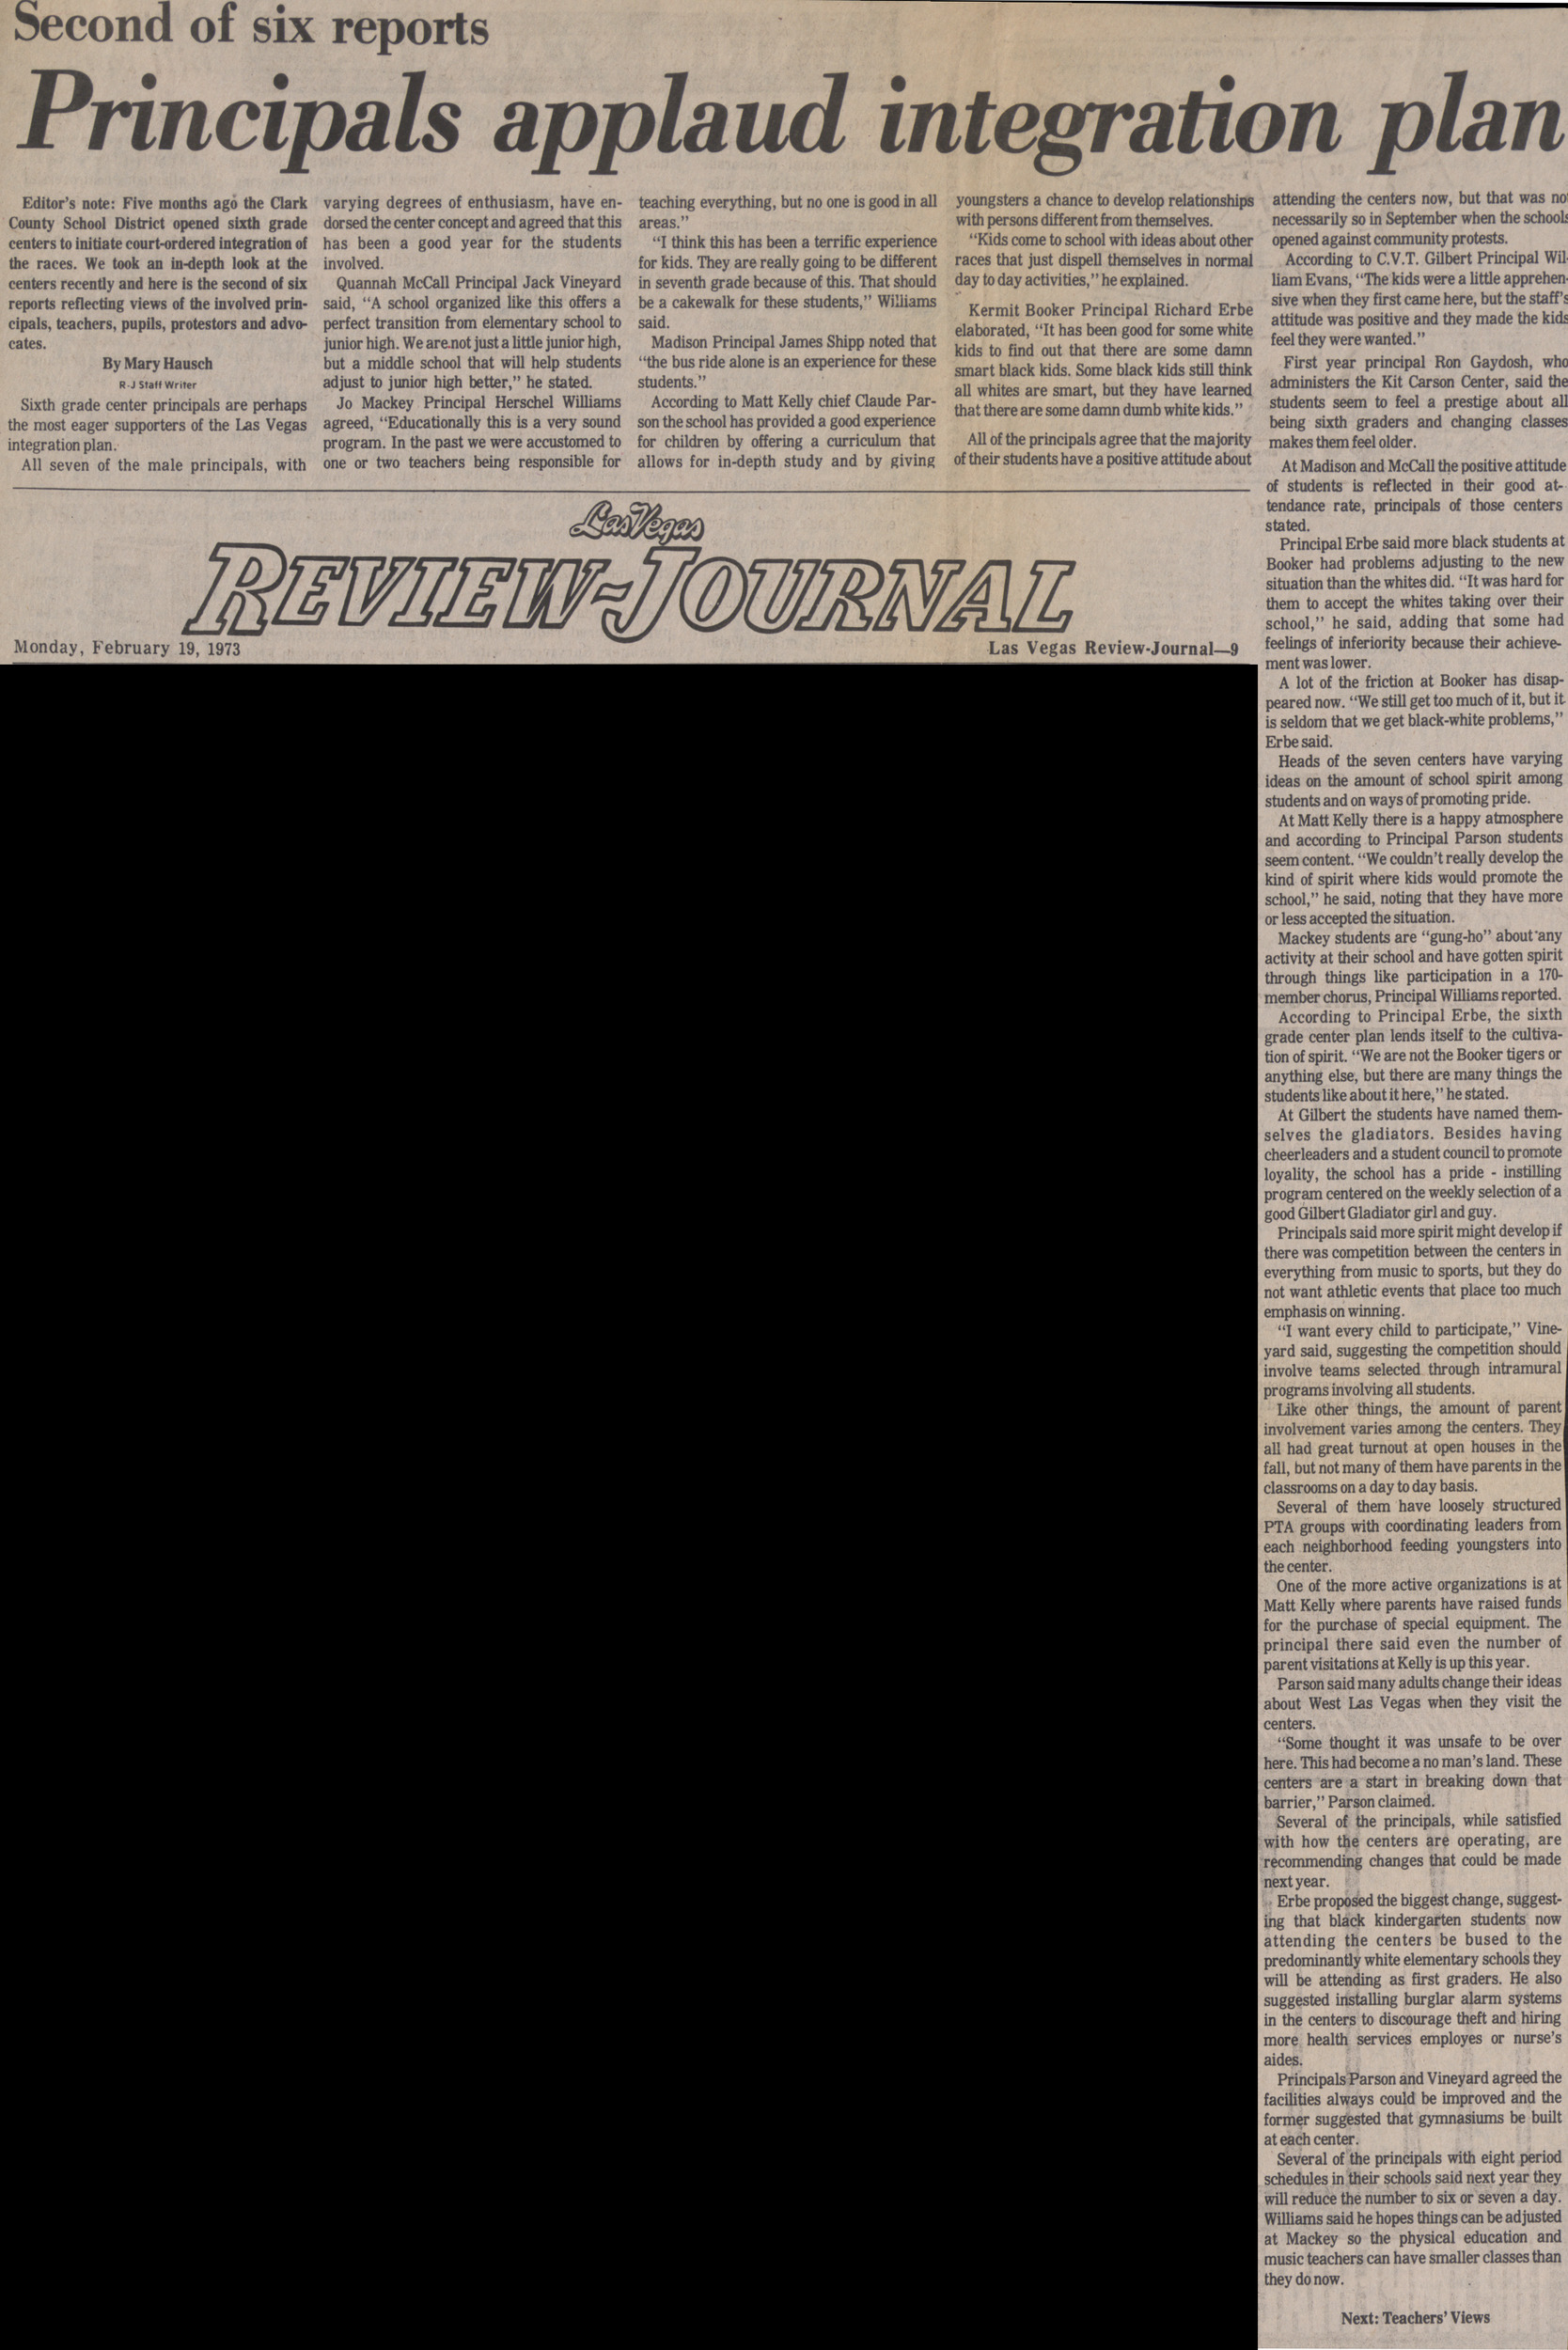 Newspaper clipping, Second of six reports, Principals applaud integration plan, Las Vegas Review-Journal, February 19, 1973